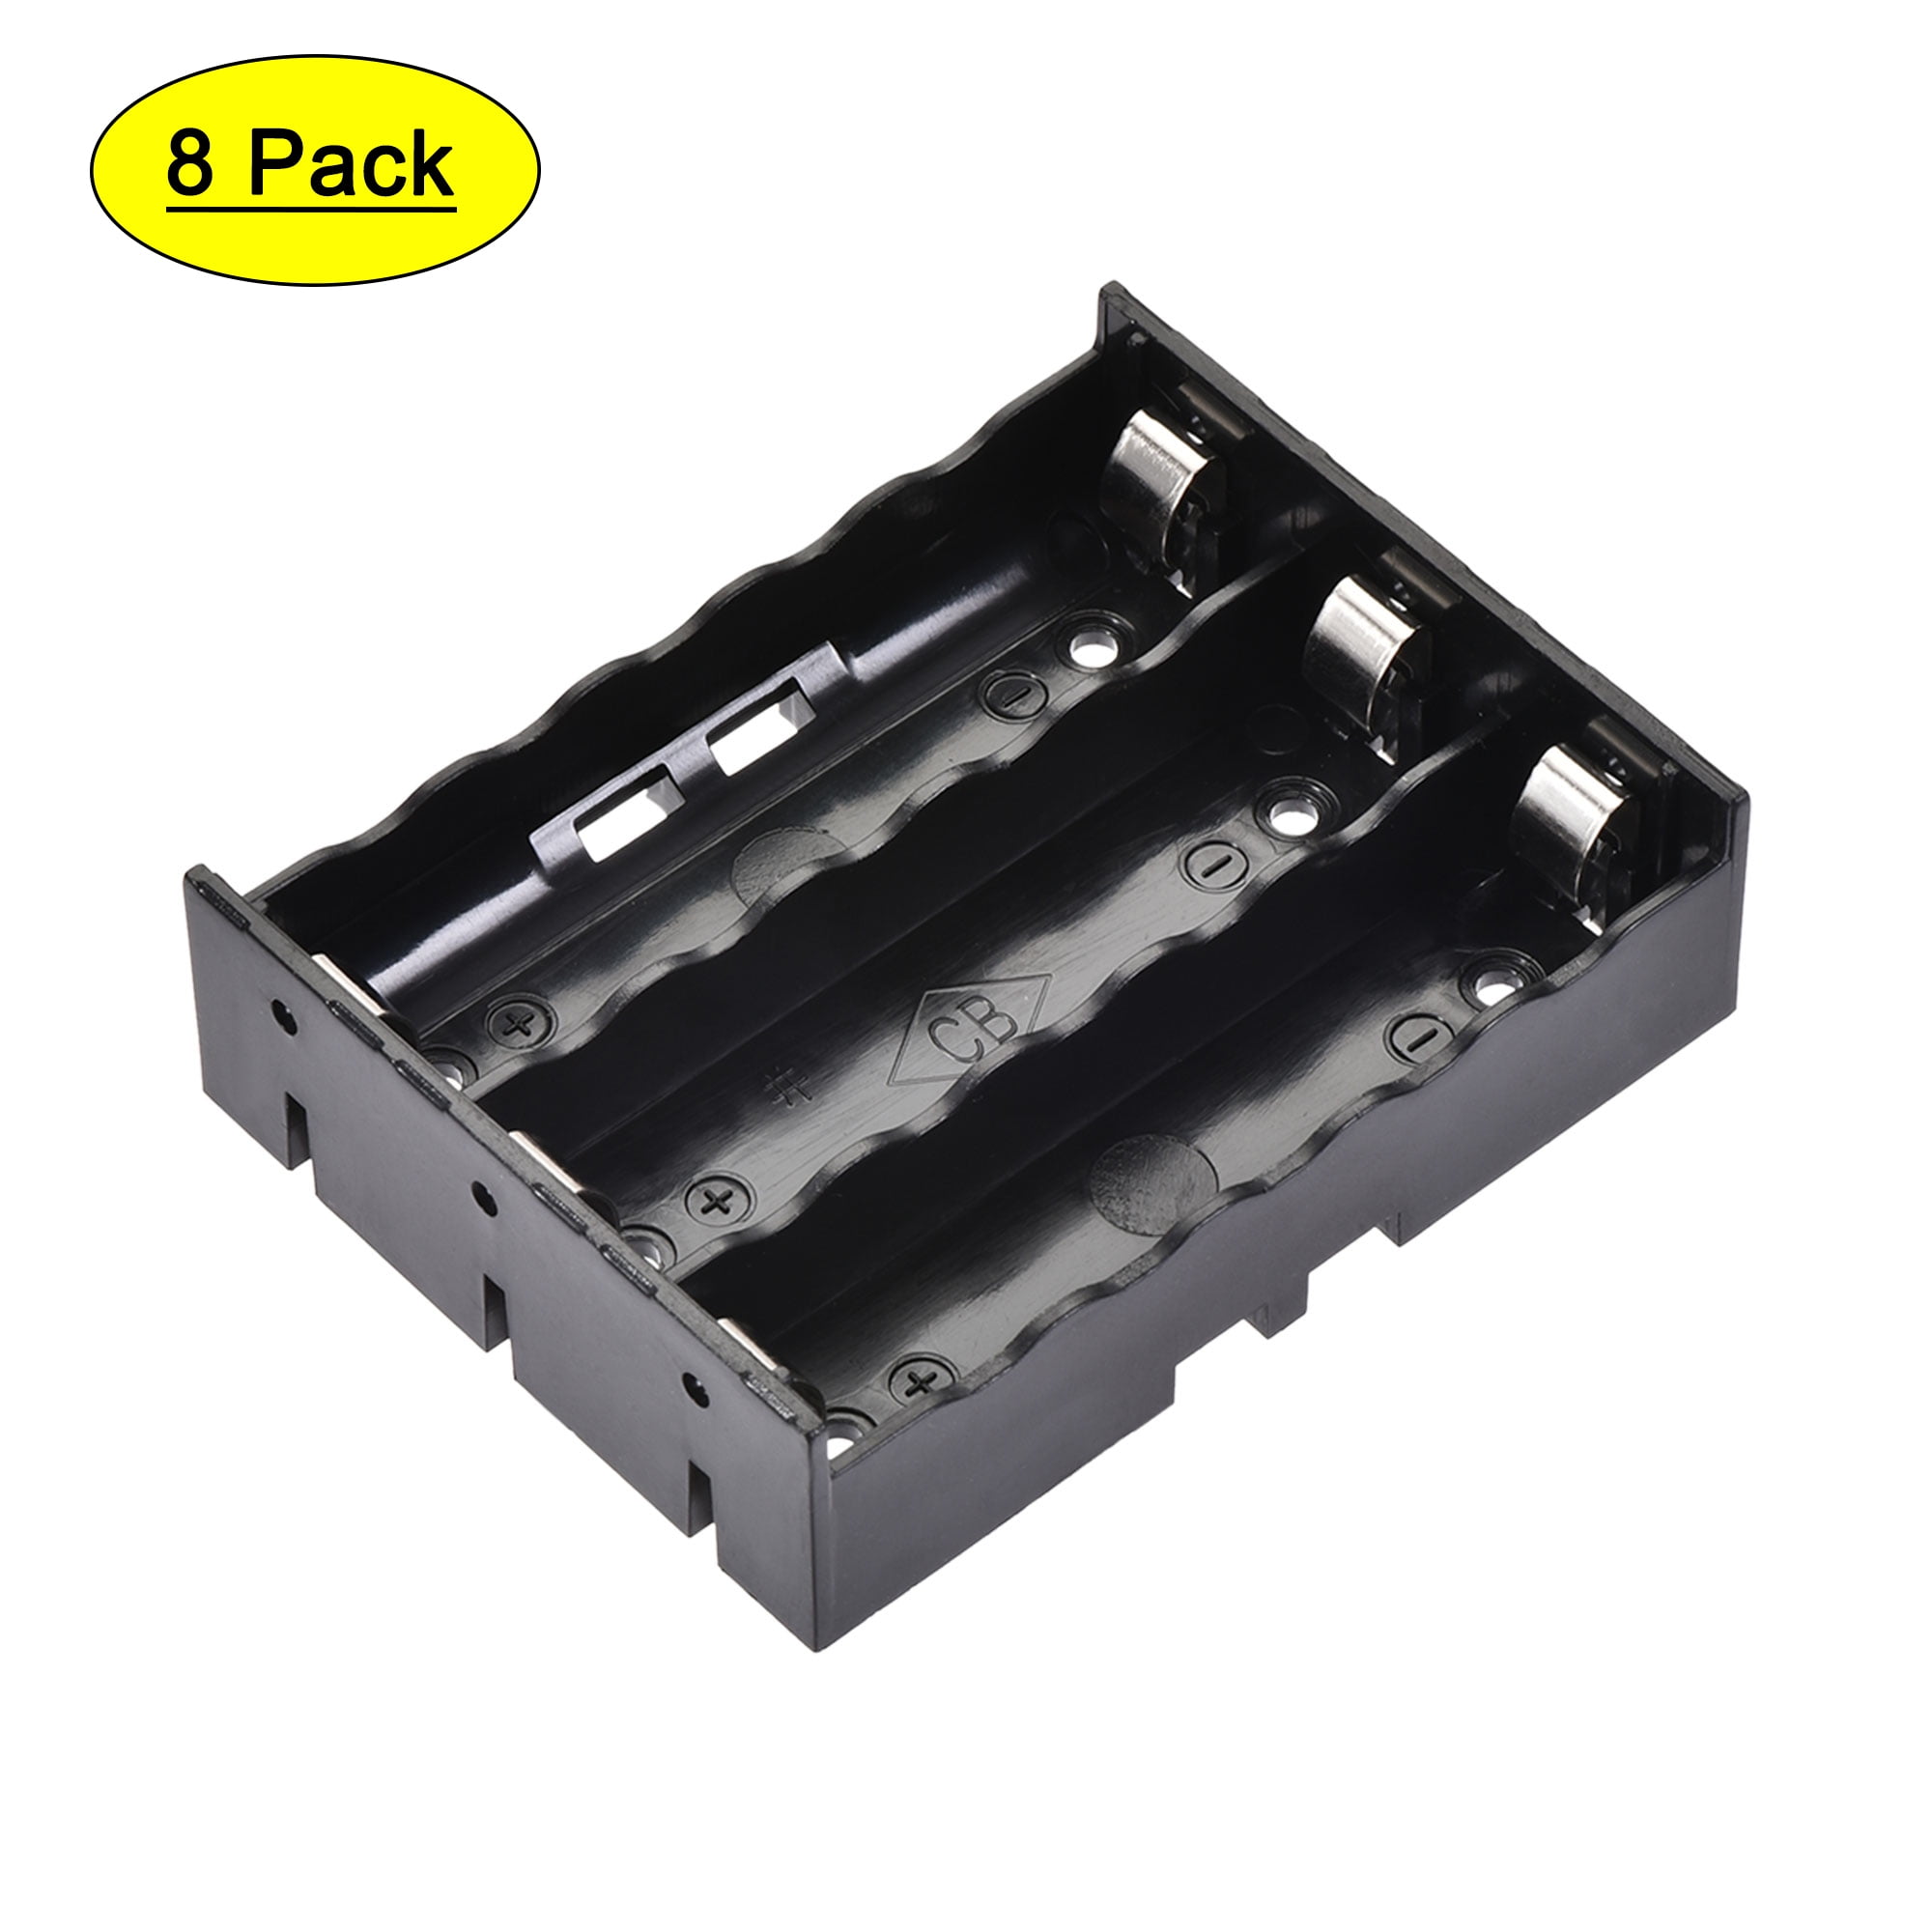 Battery Storage Organizer, The Battery Organizer Storage Case with Tester,  Clear Battery Case, Battery Holder for 180 Batteries of Various Sizes